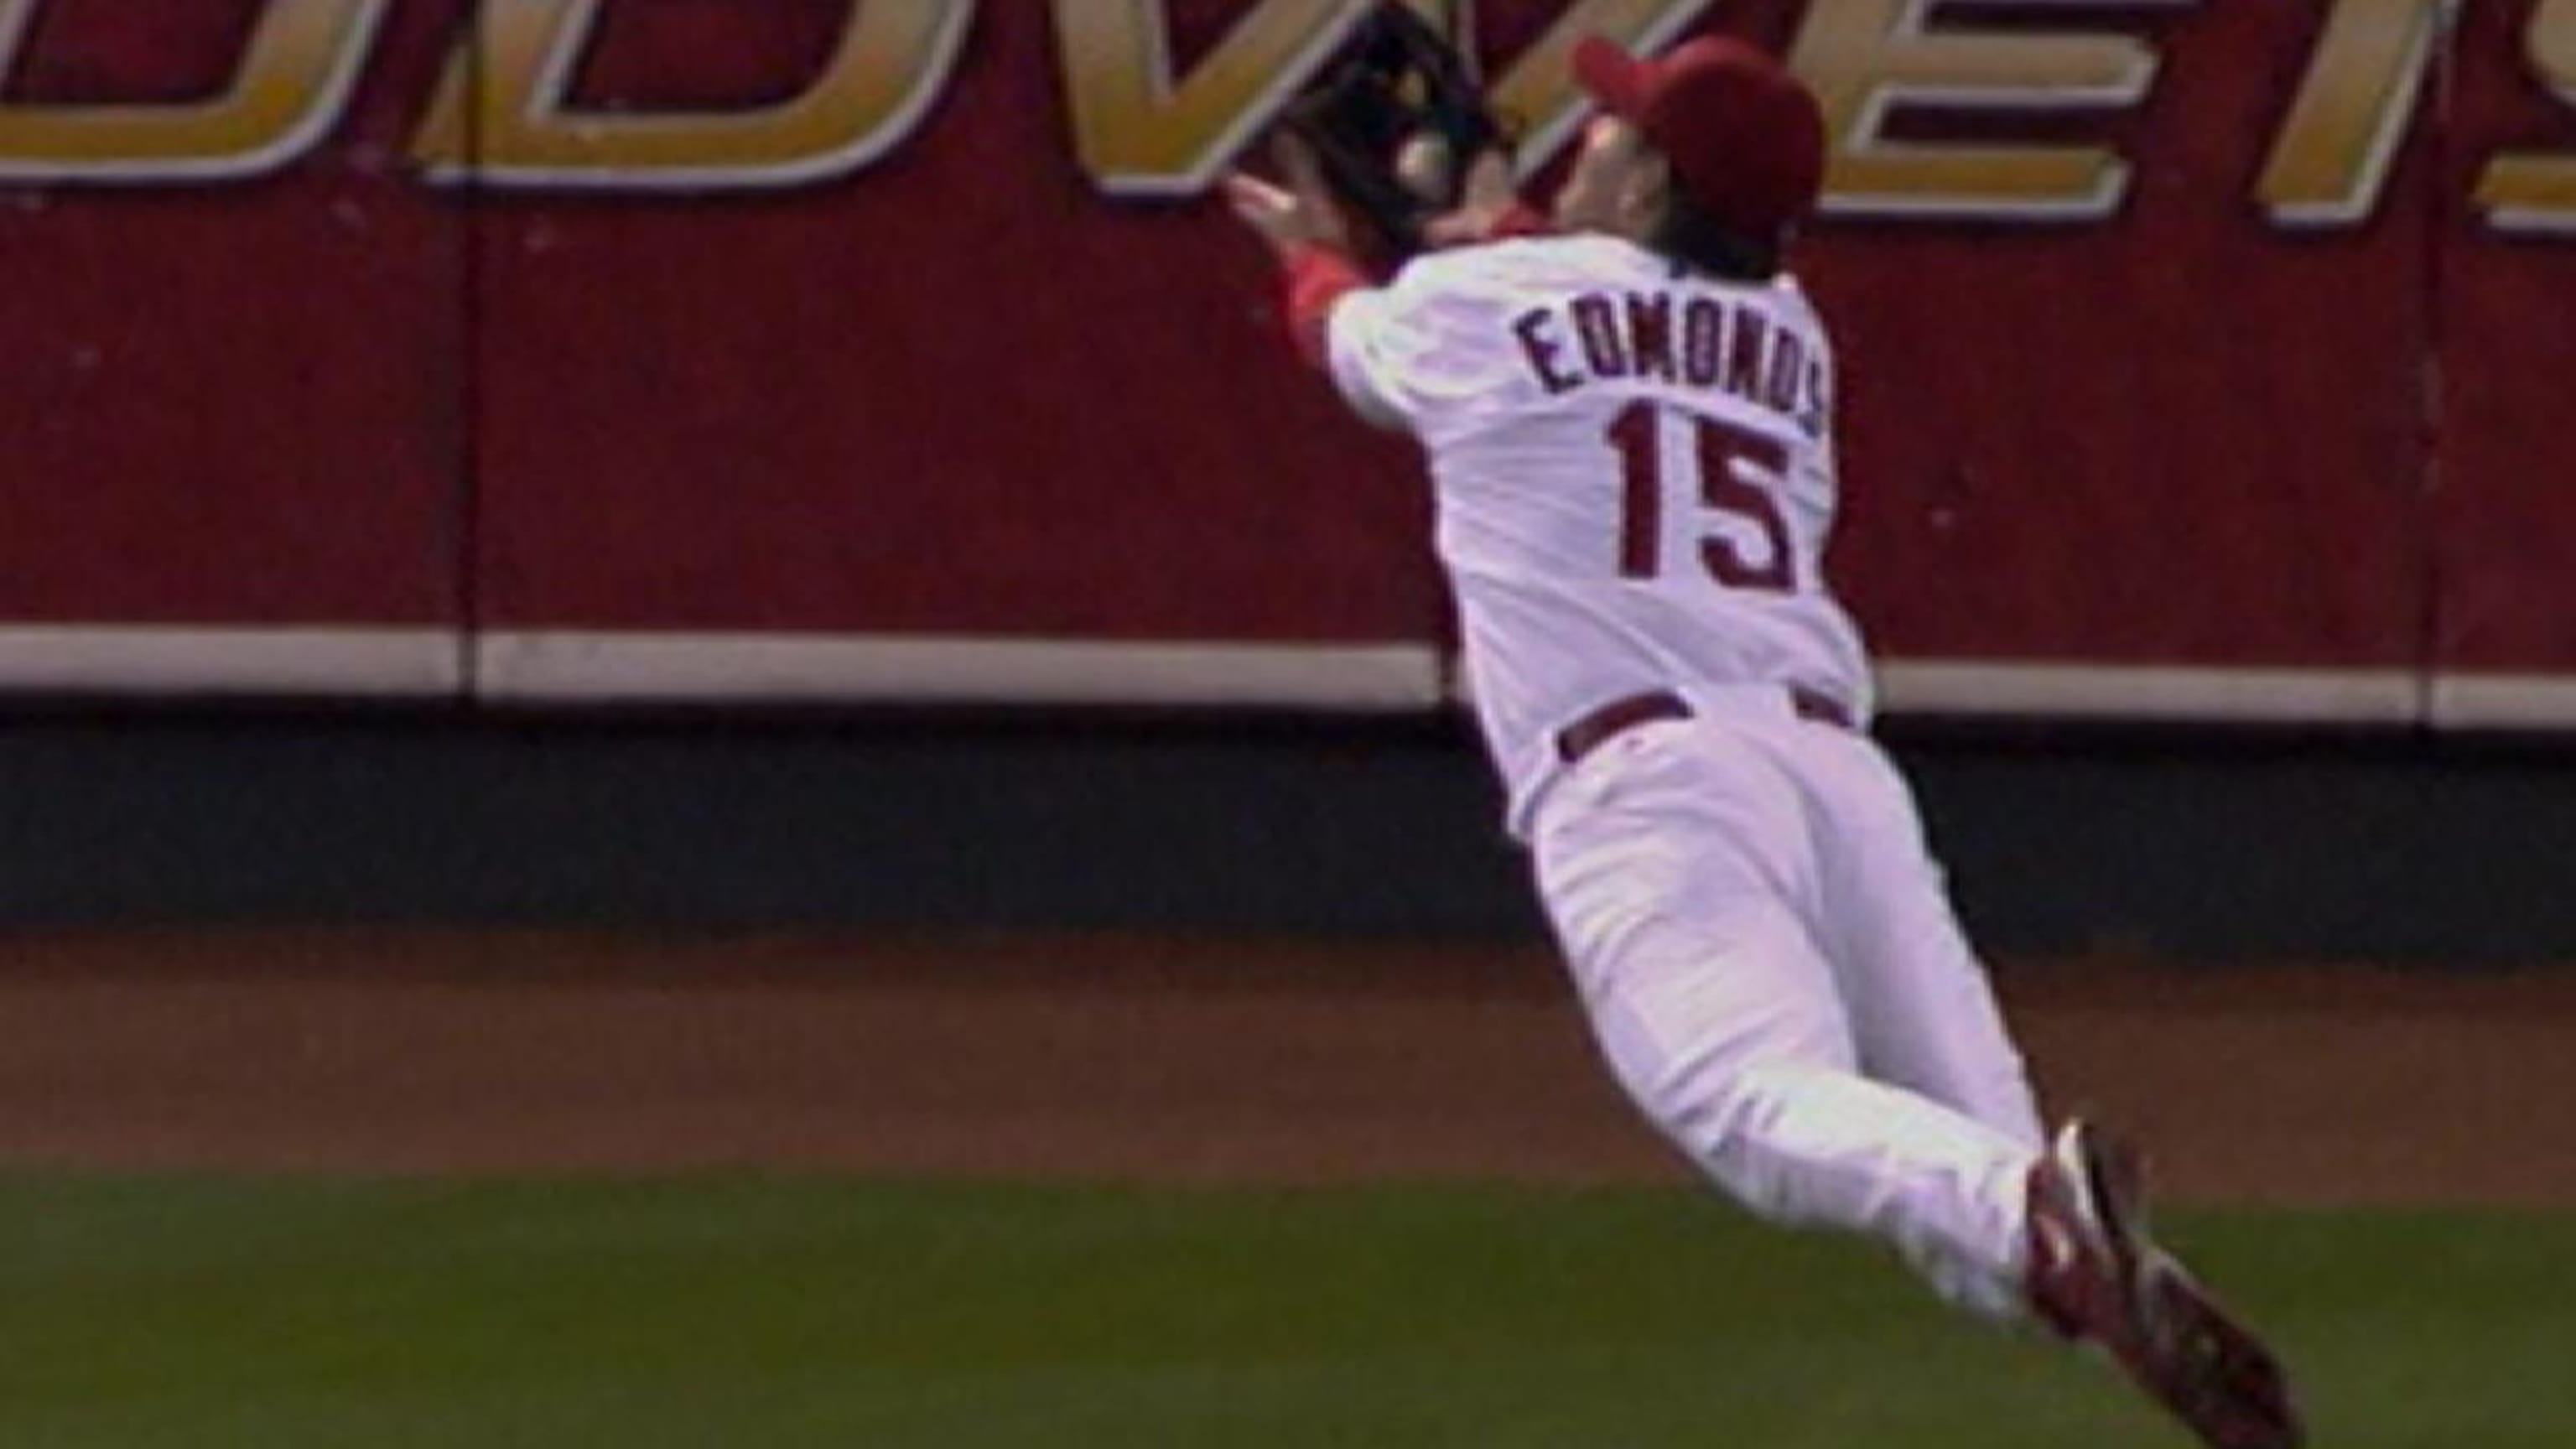 It's been seven years since Jim Edmonds retired, so let's revisit his  heroics in the 2004 NLCS